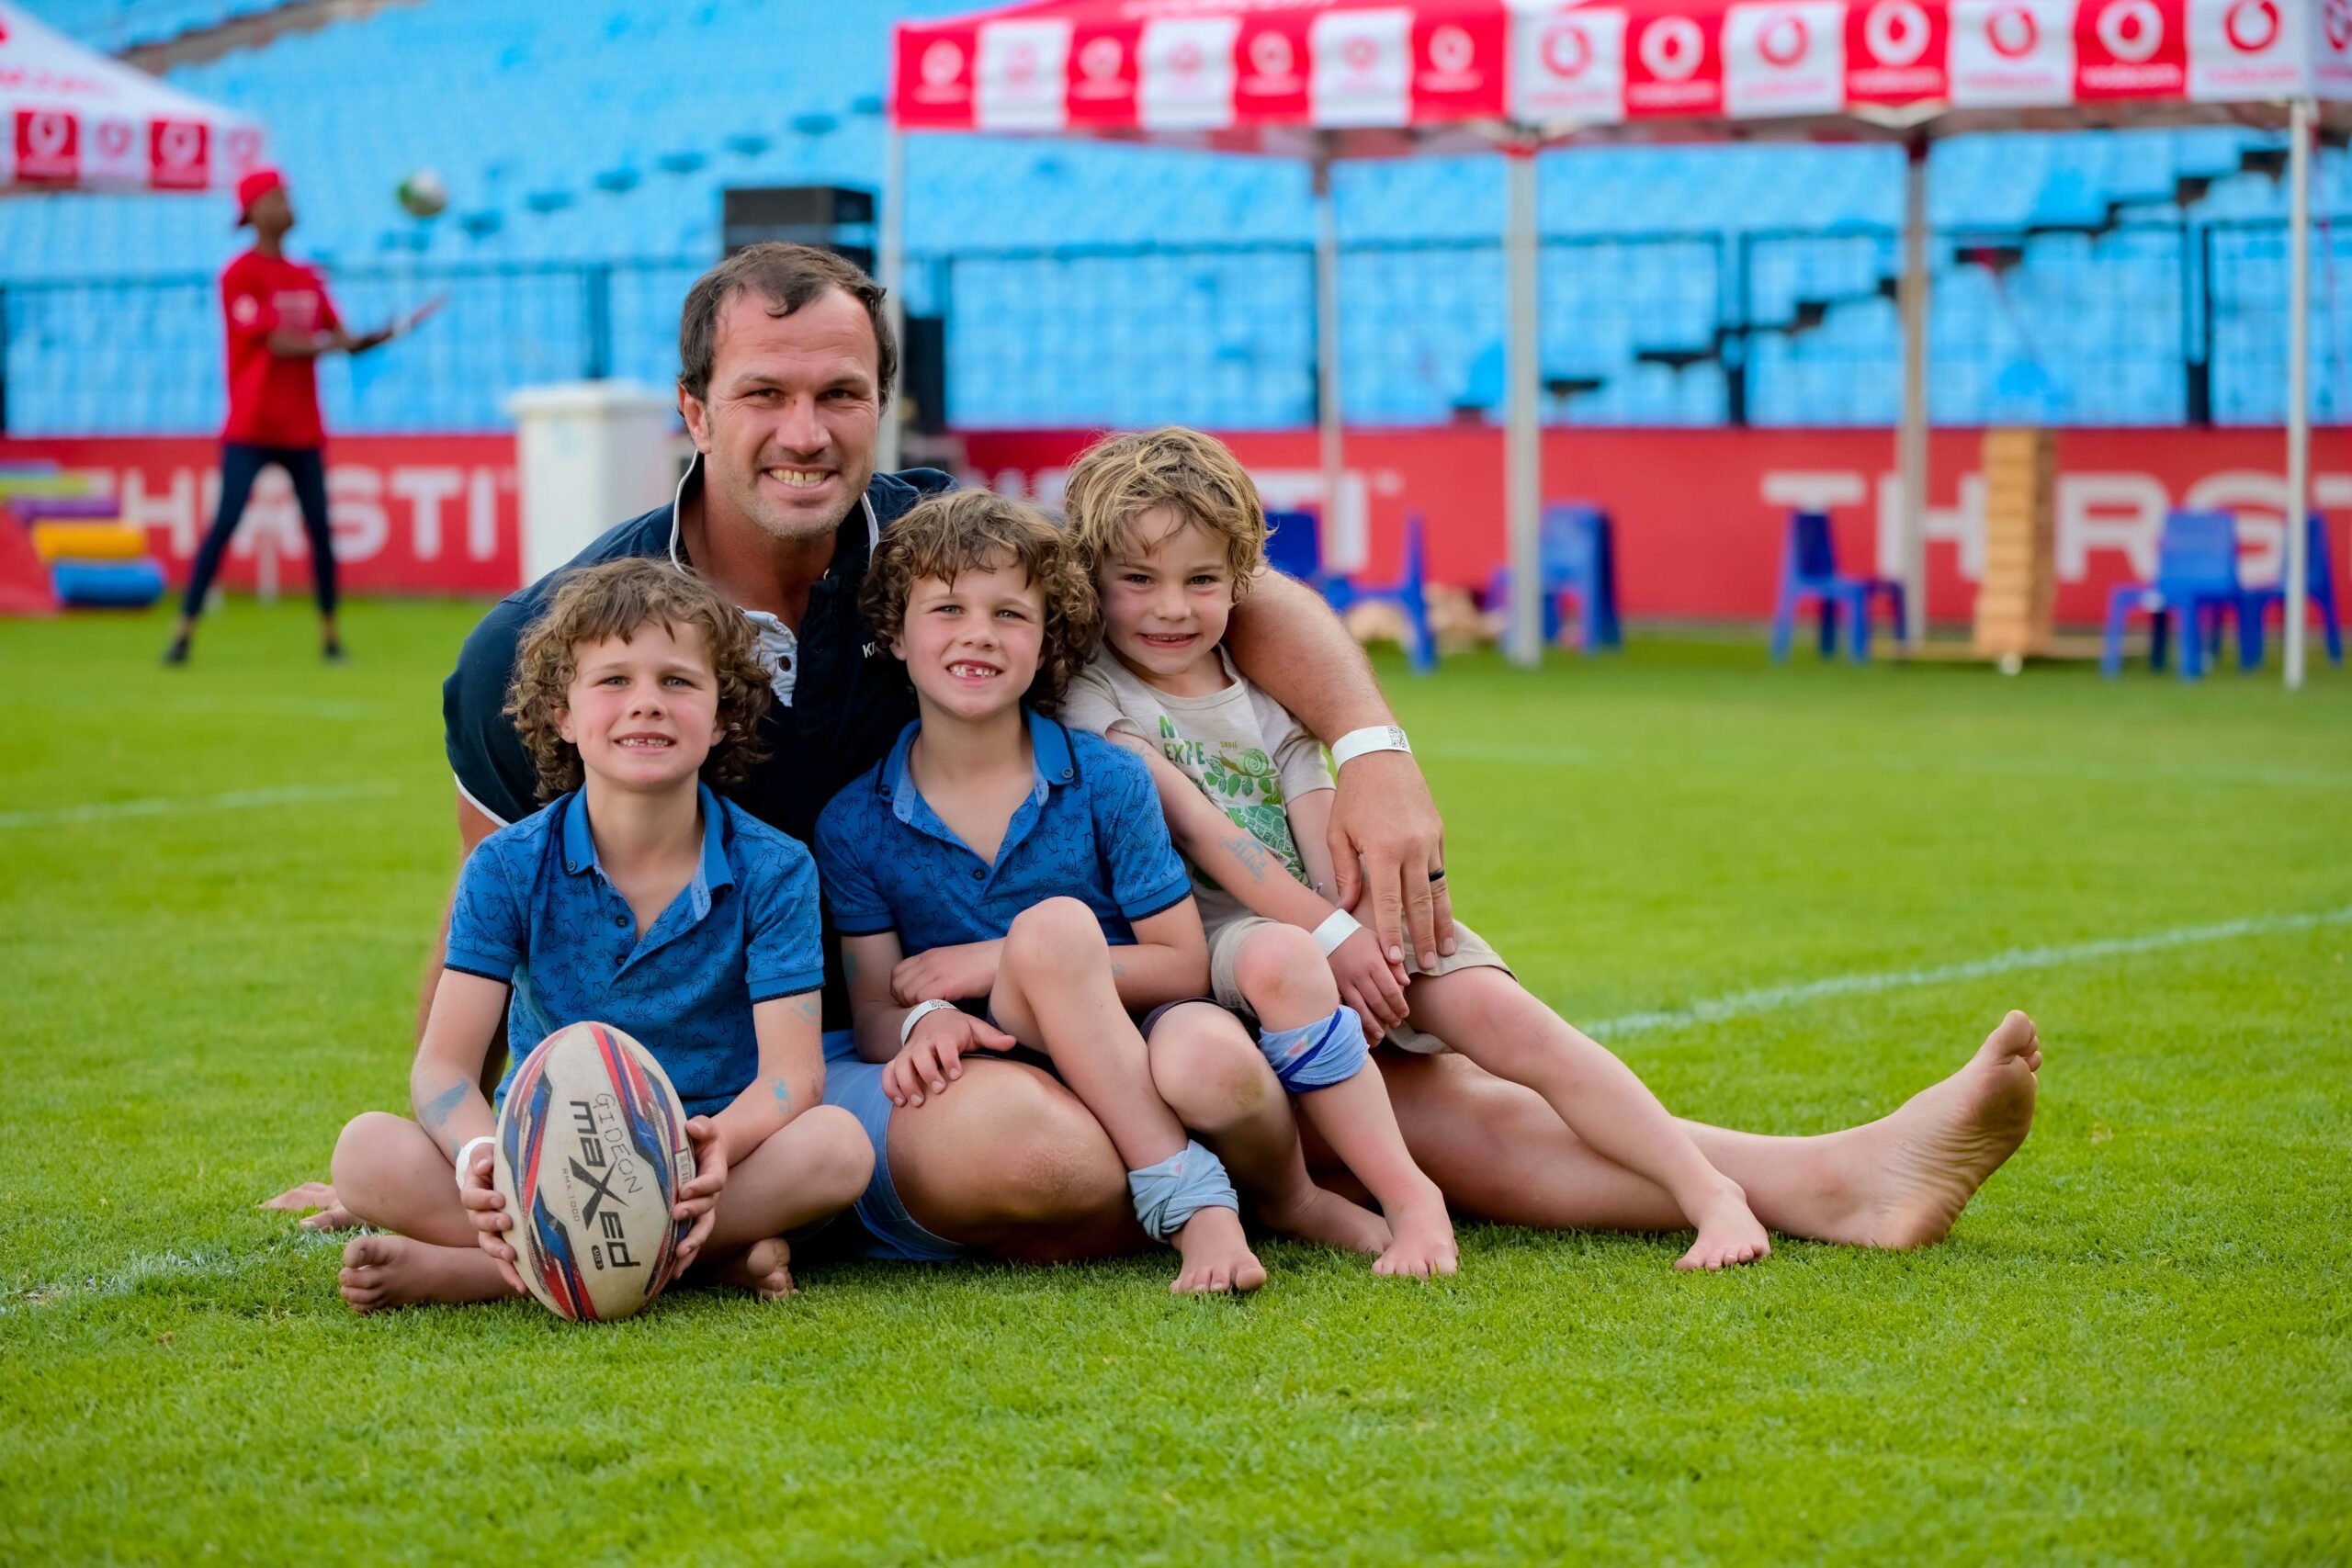 Bismarck wants to help push young Vodacom Bulls stars to greatness